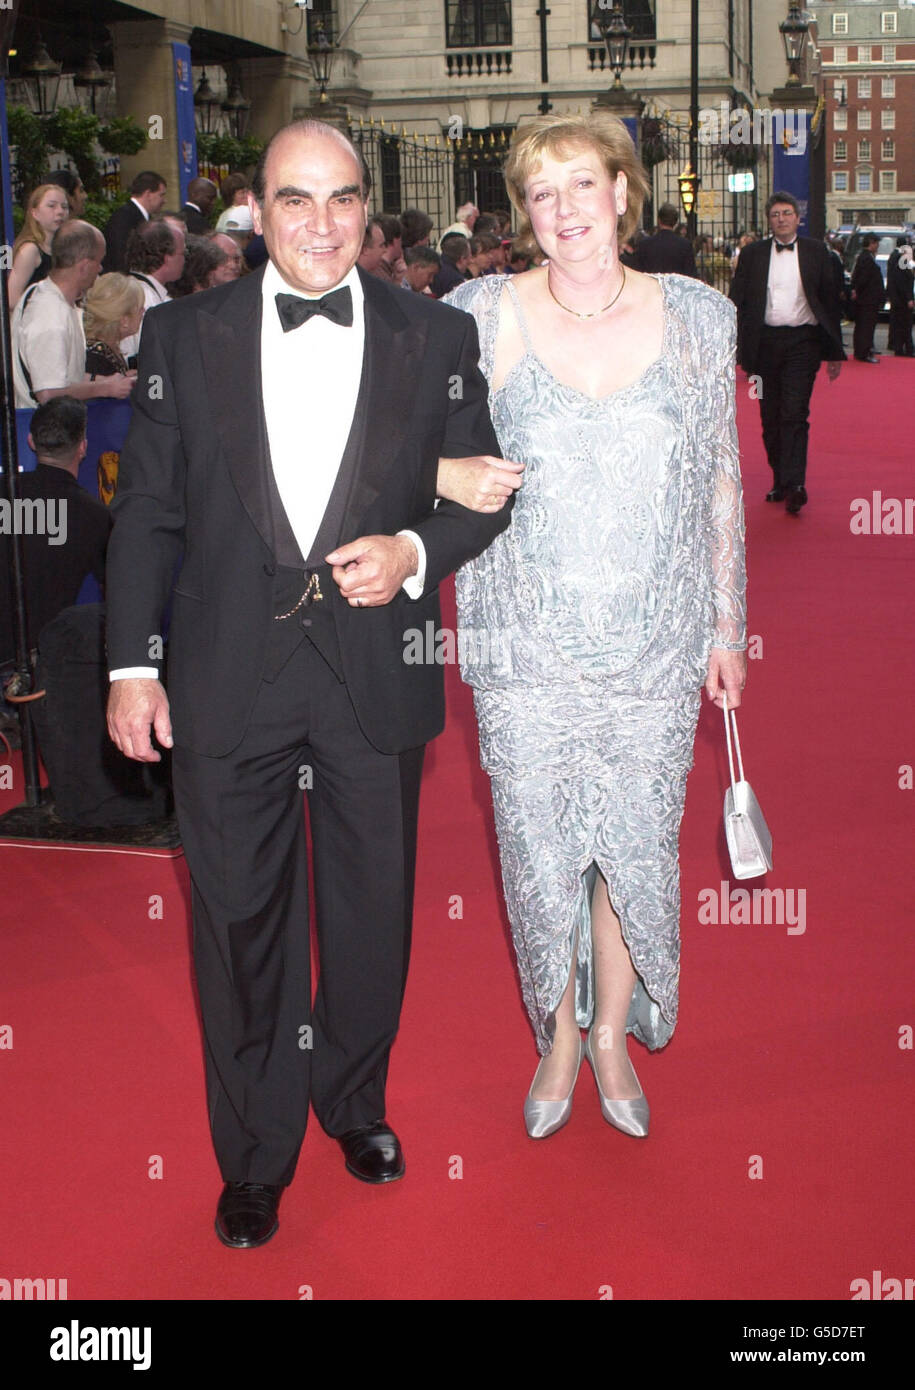 Actor David Suchet with his wife Sheila arrives at the British Academy Television Awards at the Grosvenor House Hotel in London. Stock Photo